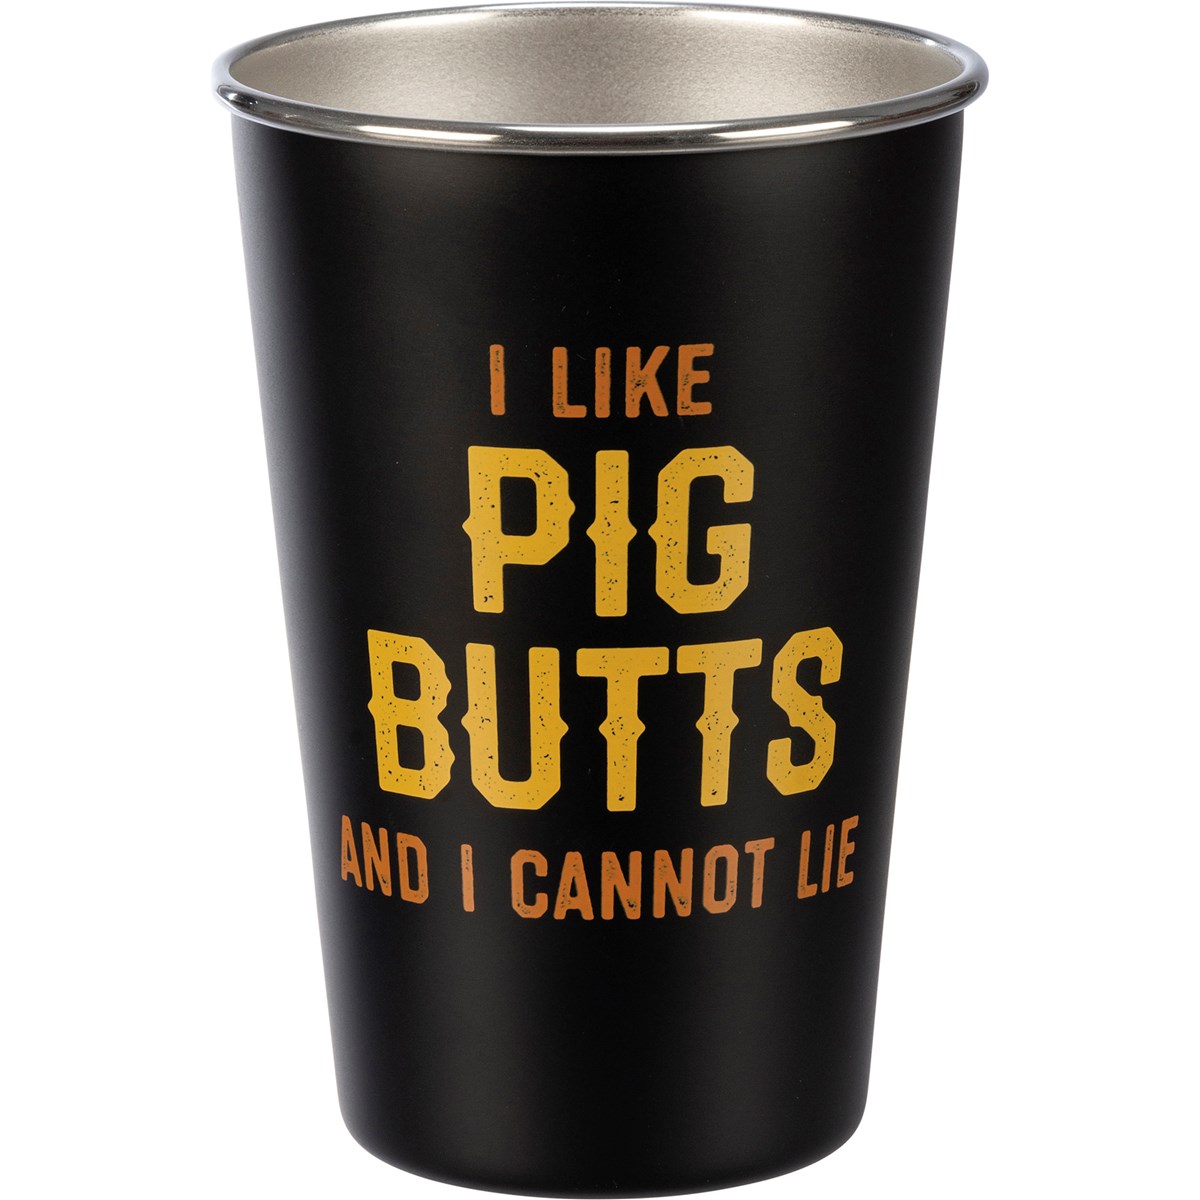 Pint - I Like Pig Butts And I Cannot Lie - 16 oz., 3.50" Diameter x 4.75" - Stainless Steel